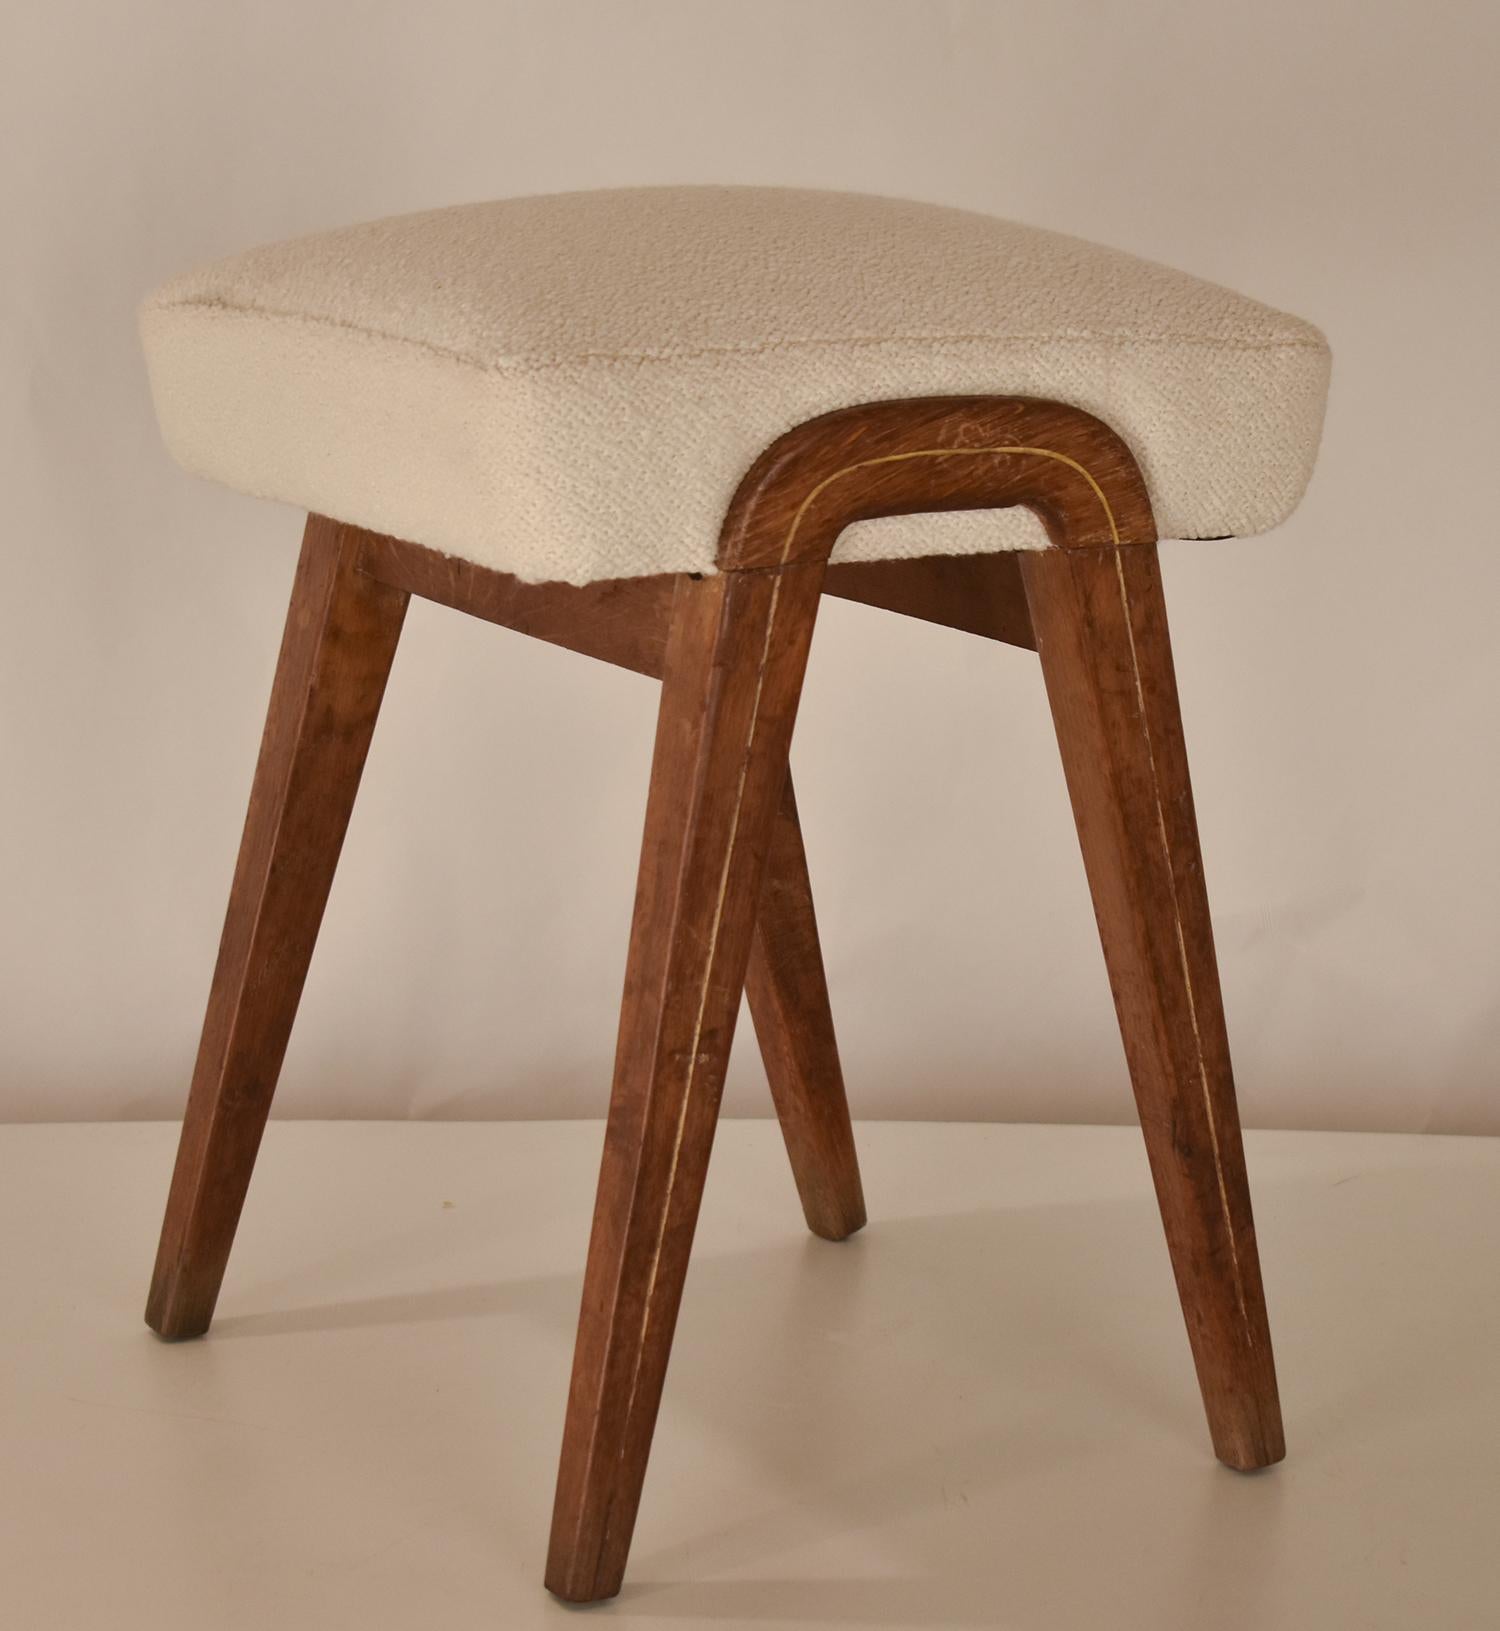 Spanish stool in white fabric oak wood.
1960's.
The upholstery is new.